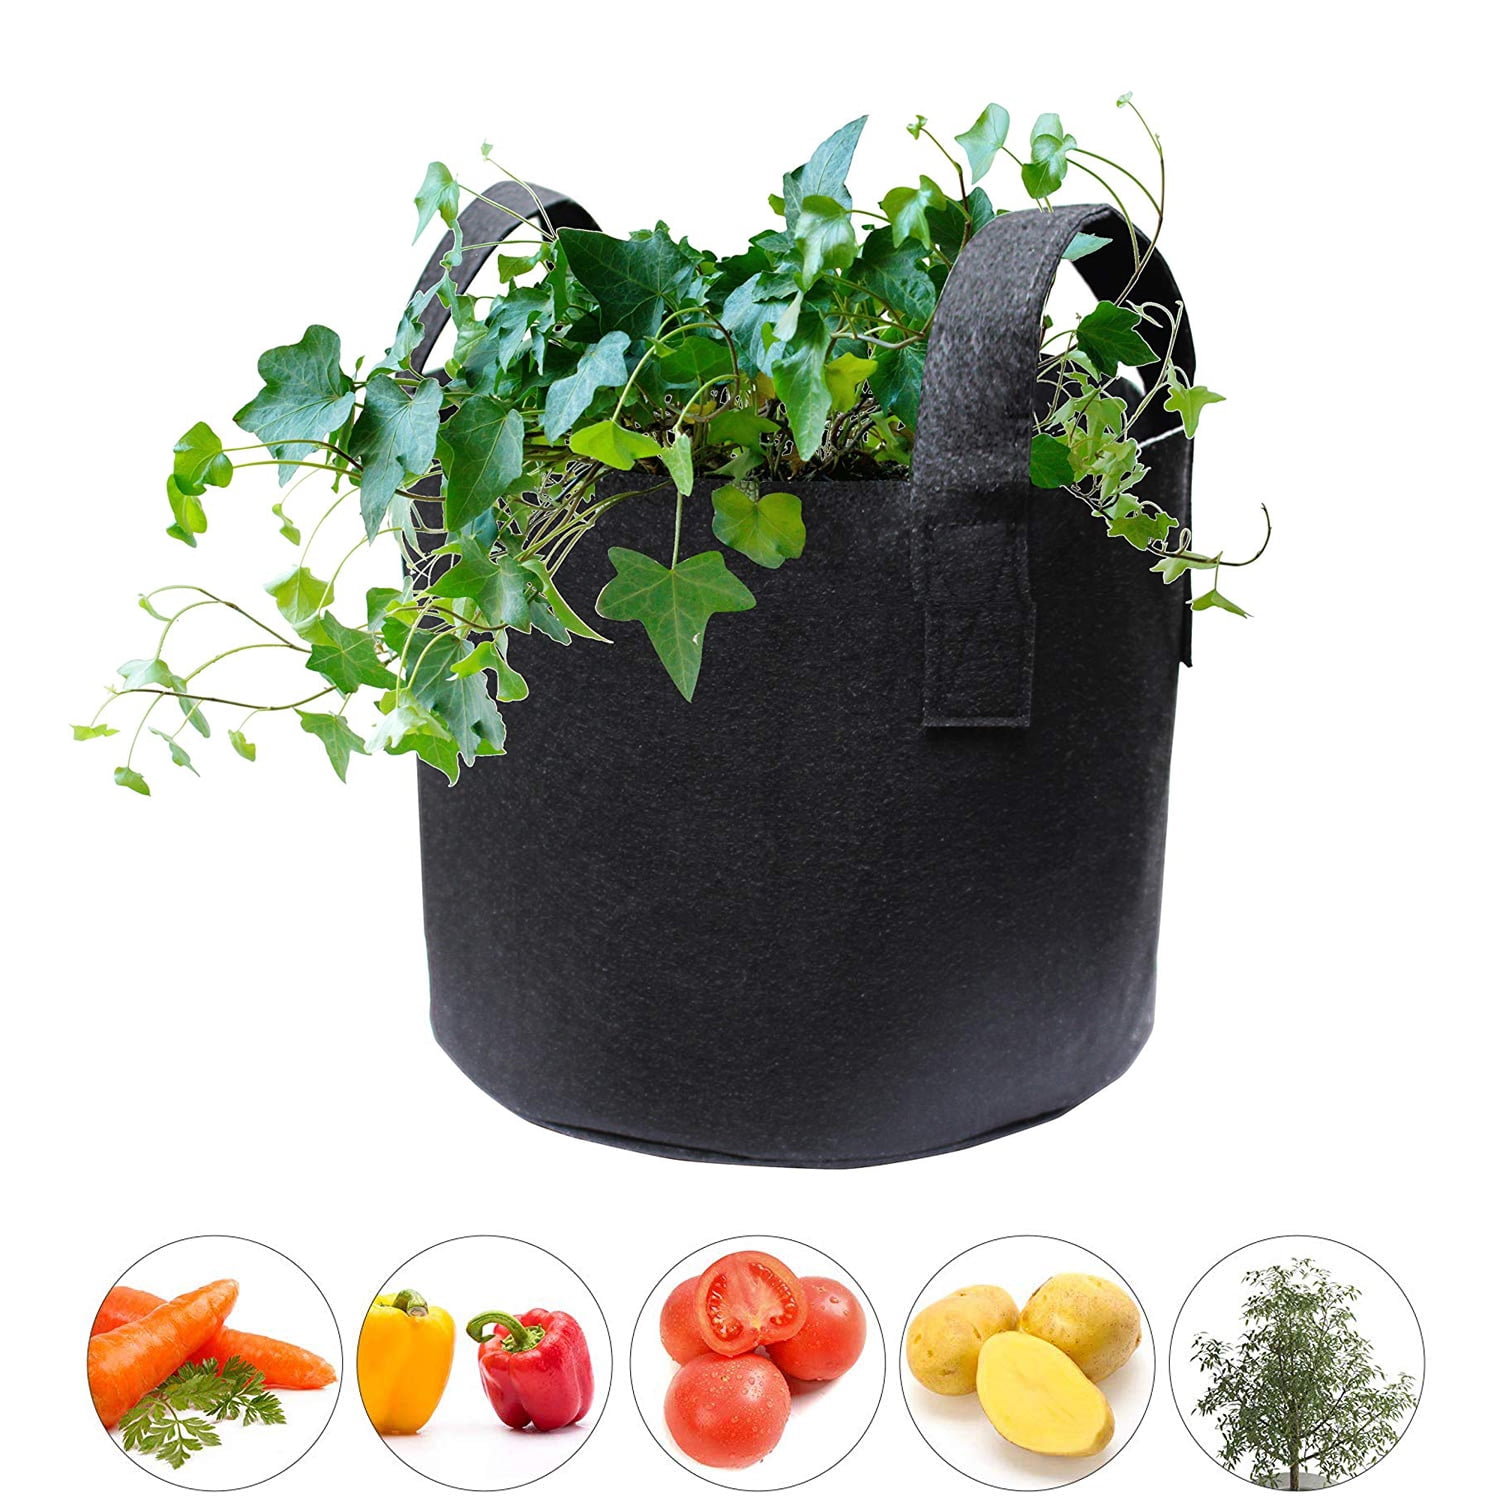 JERIA 12-Pack 7 Gallon Black Vegetable/Flower/Plant Grow Bags Aeration Fabric Pots with Handles Come with 12 Pcs Plant Labels 